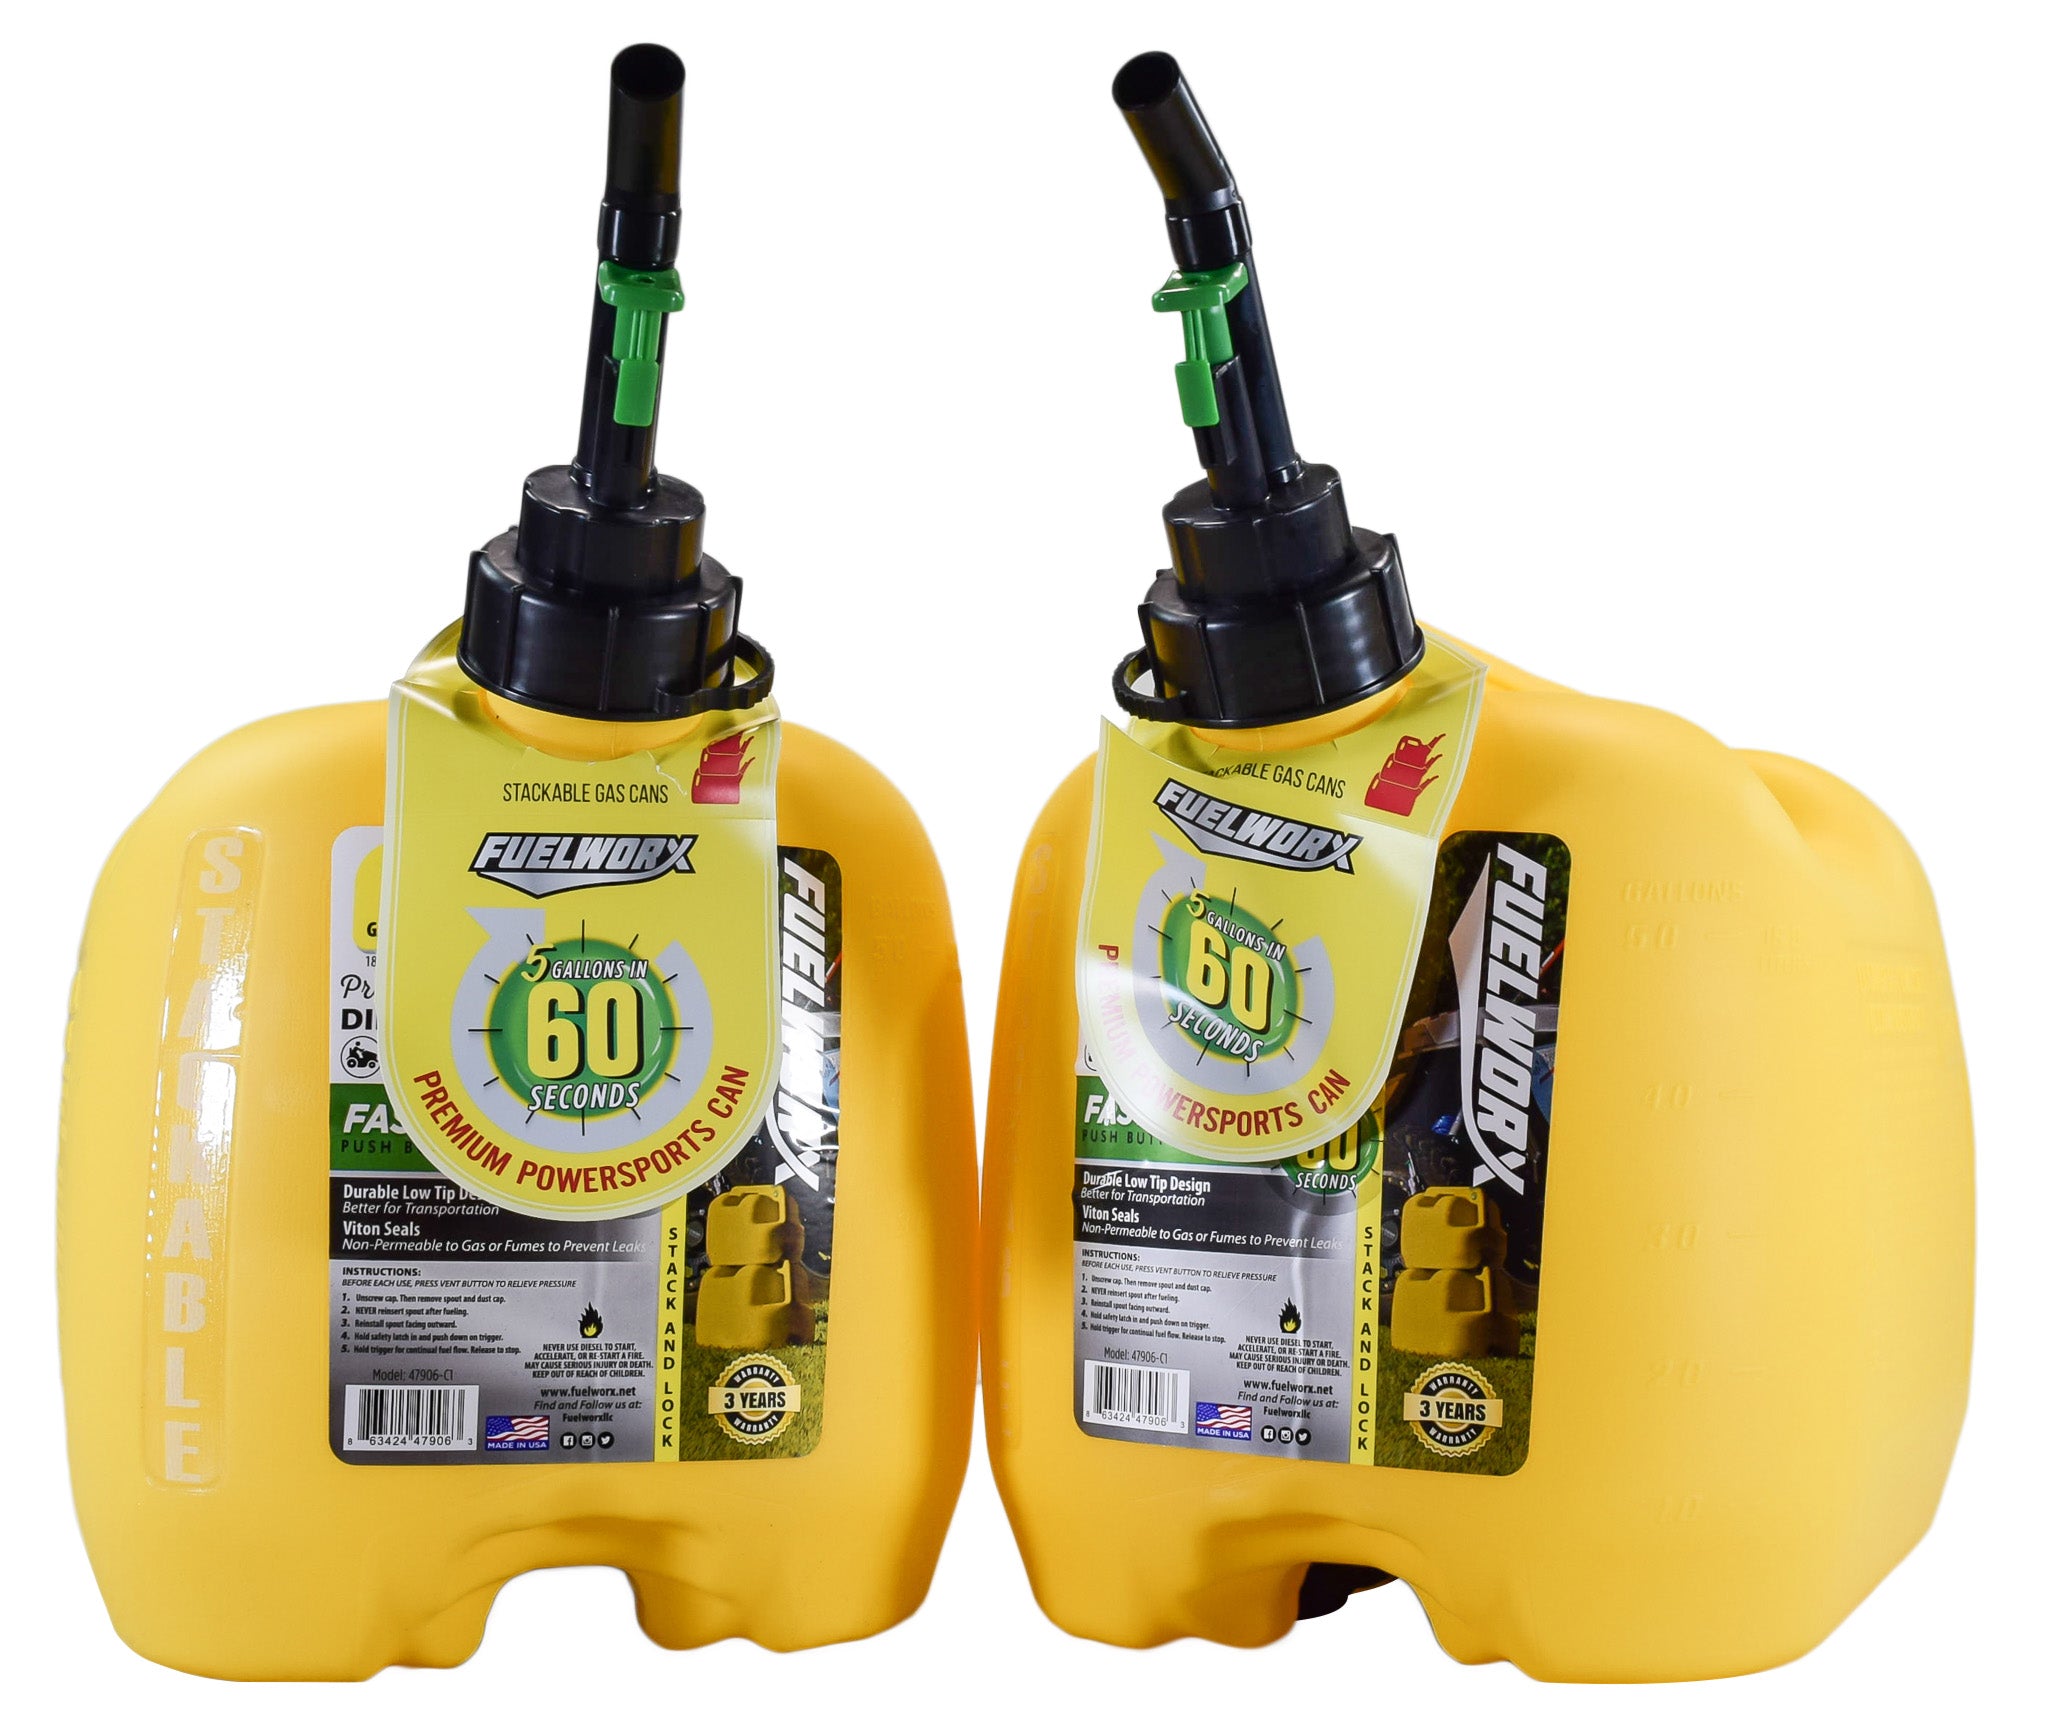 Fuelworx-Yellow-5-Gallon-Stackable-Fast-Pour-Diesel-Fuel-Cans-CARB-Compliant-Made-in-The-USA-5-Gallon-Diesel-Cans-2-Pack-image-1